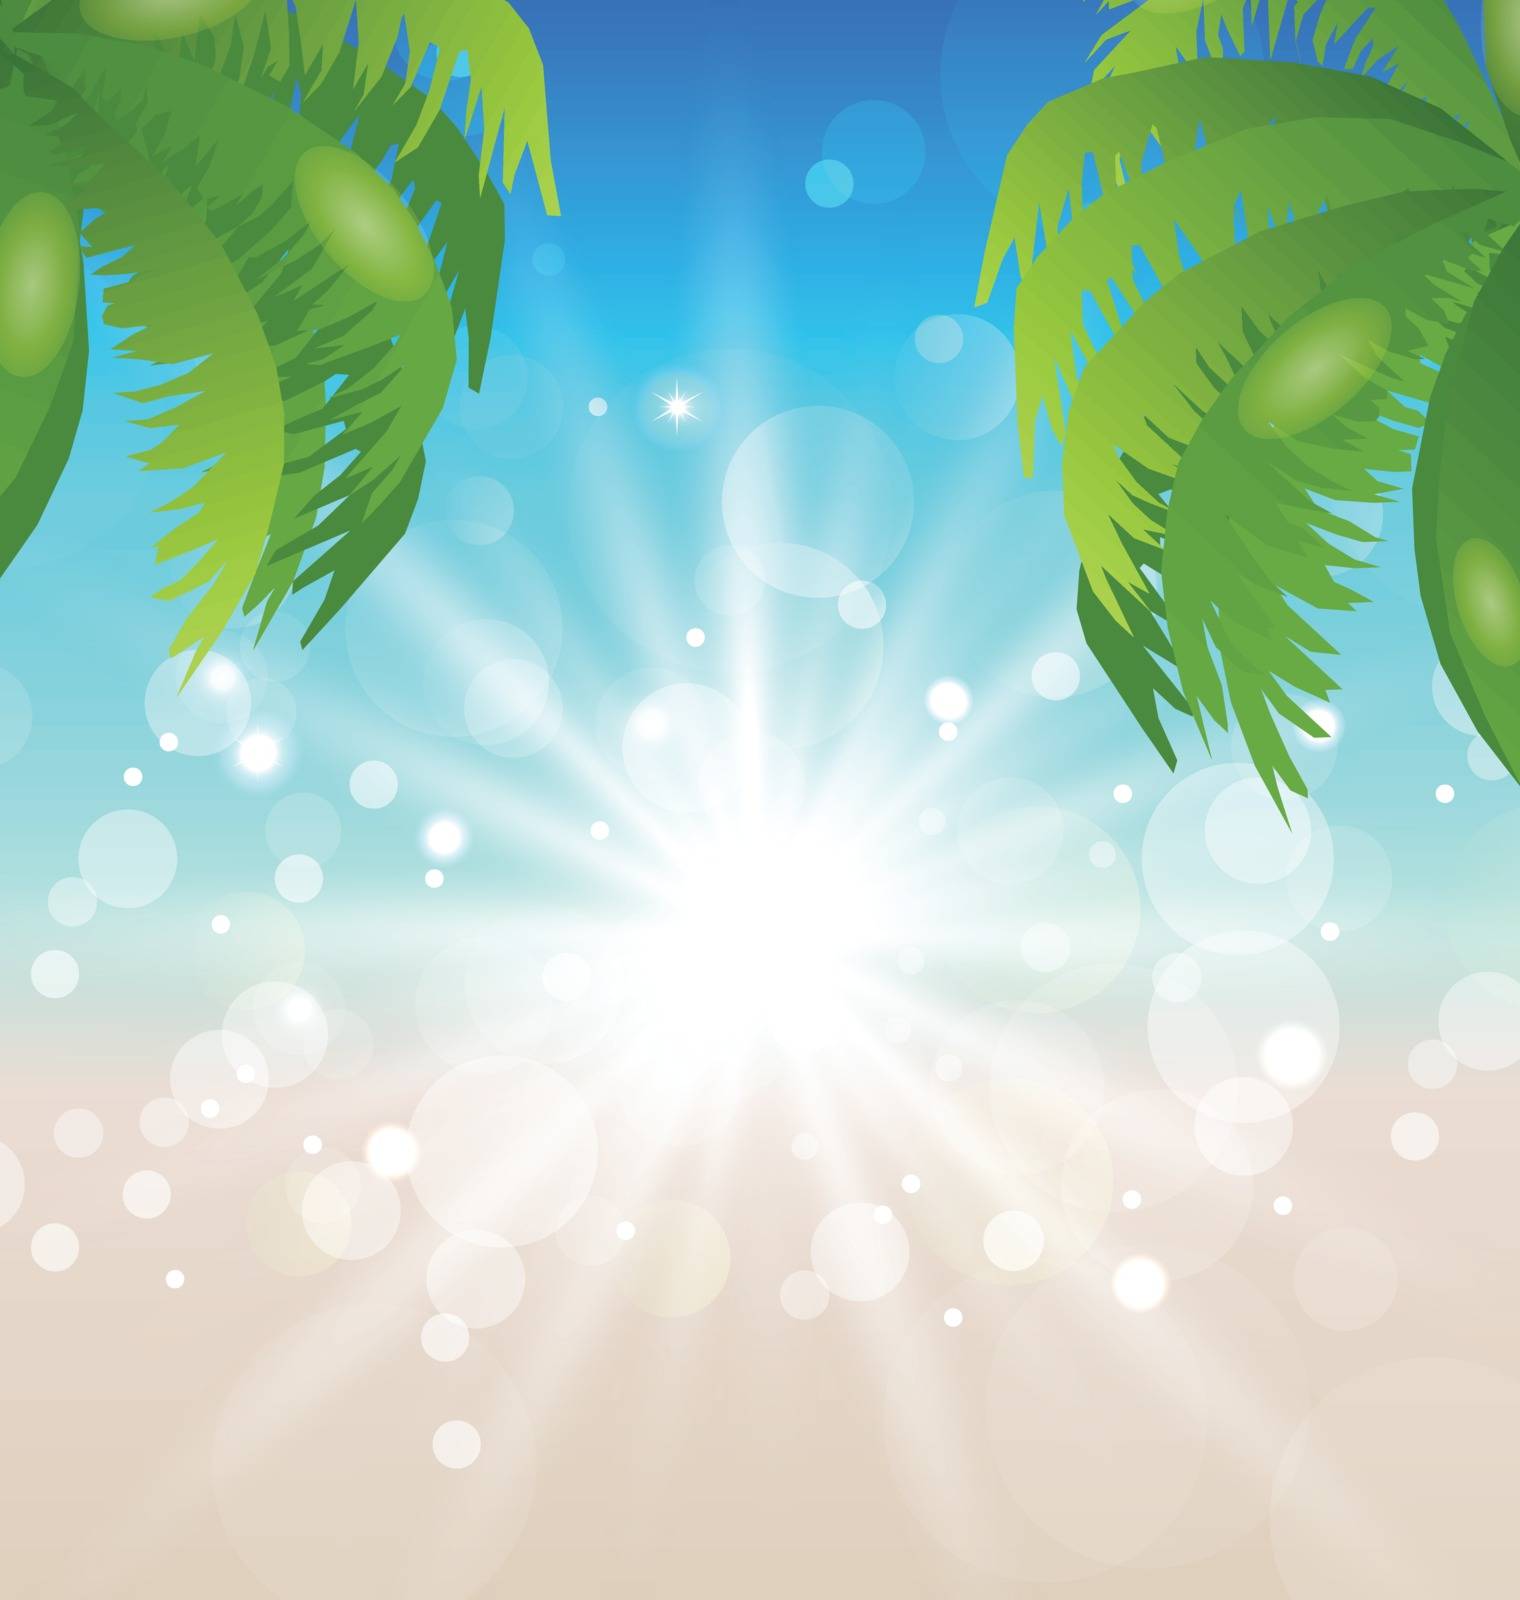 Summer holiday background with sunlight and palmtree by smeagorl